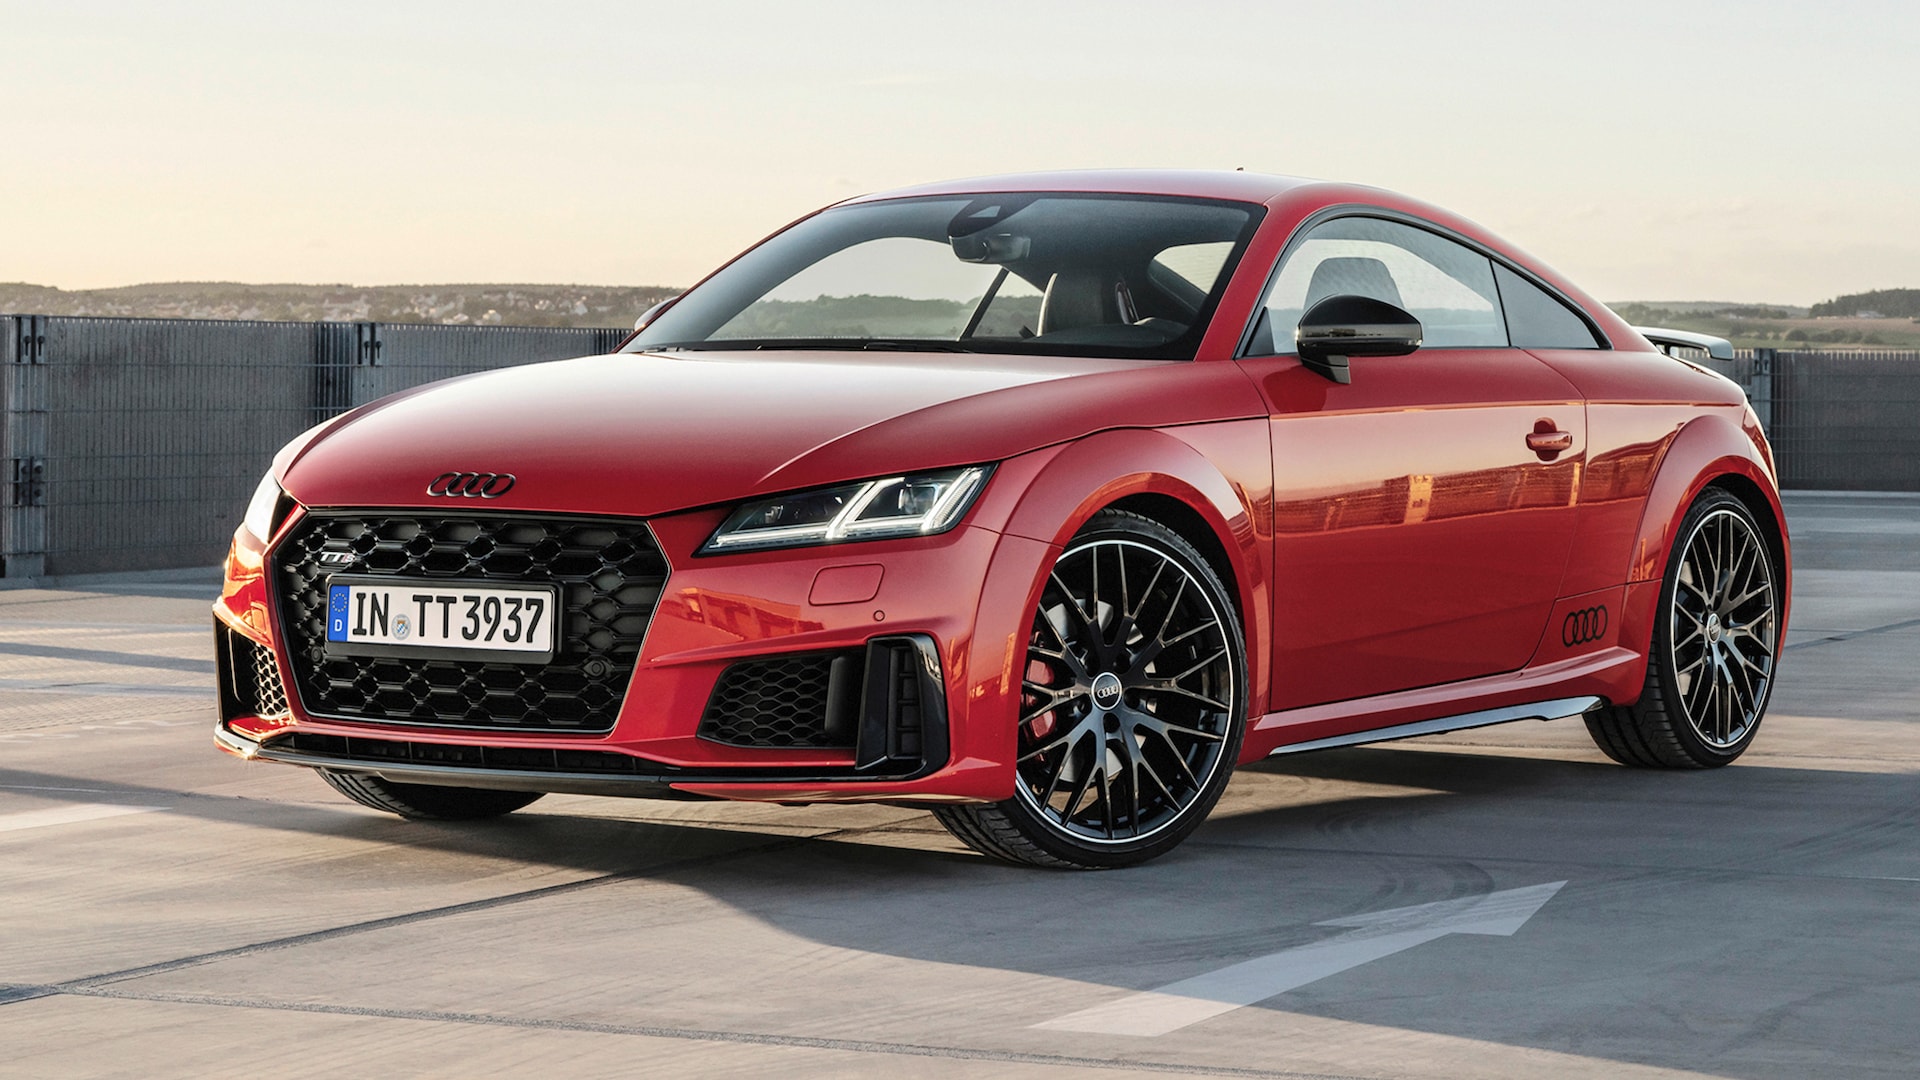 2022 Audi TT Prices, Reviews, and Photos - MotorTrend